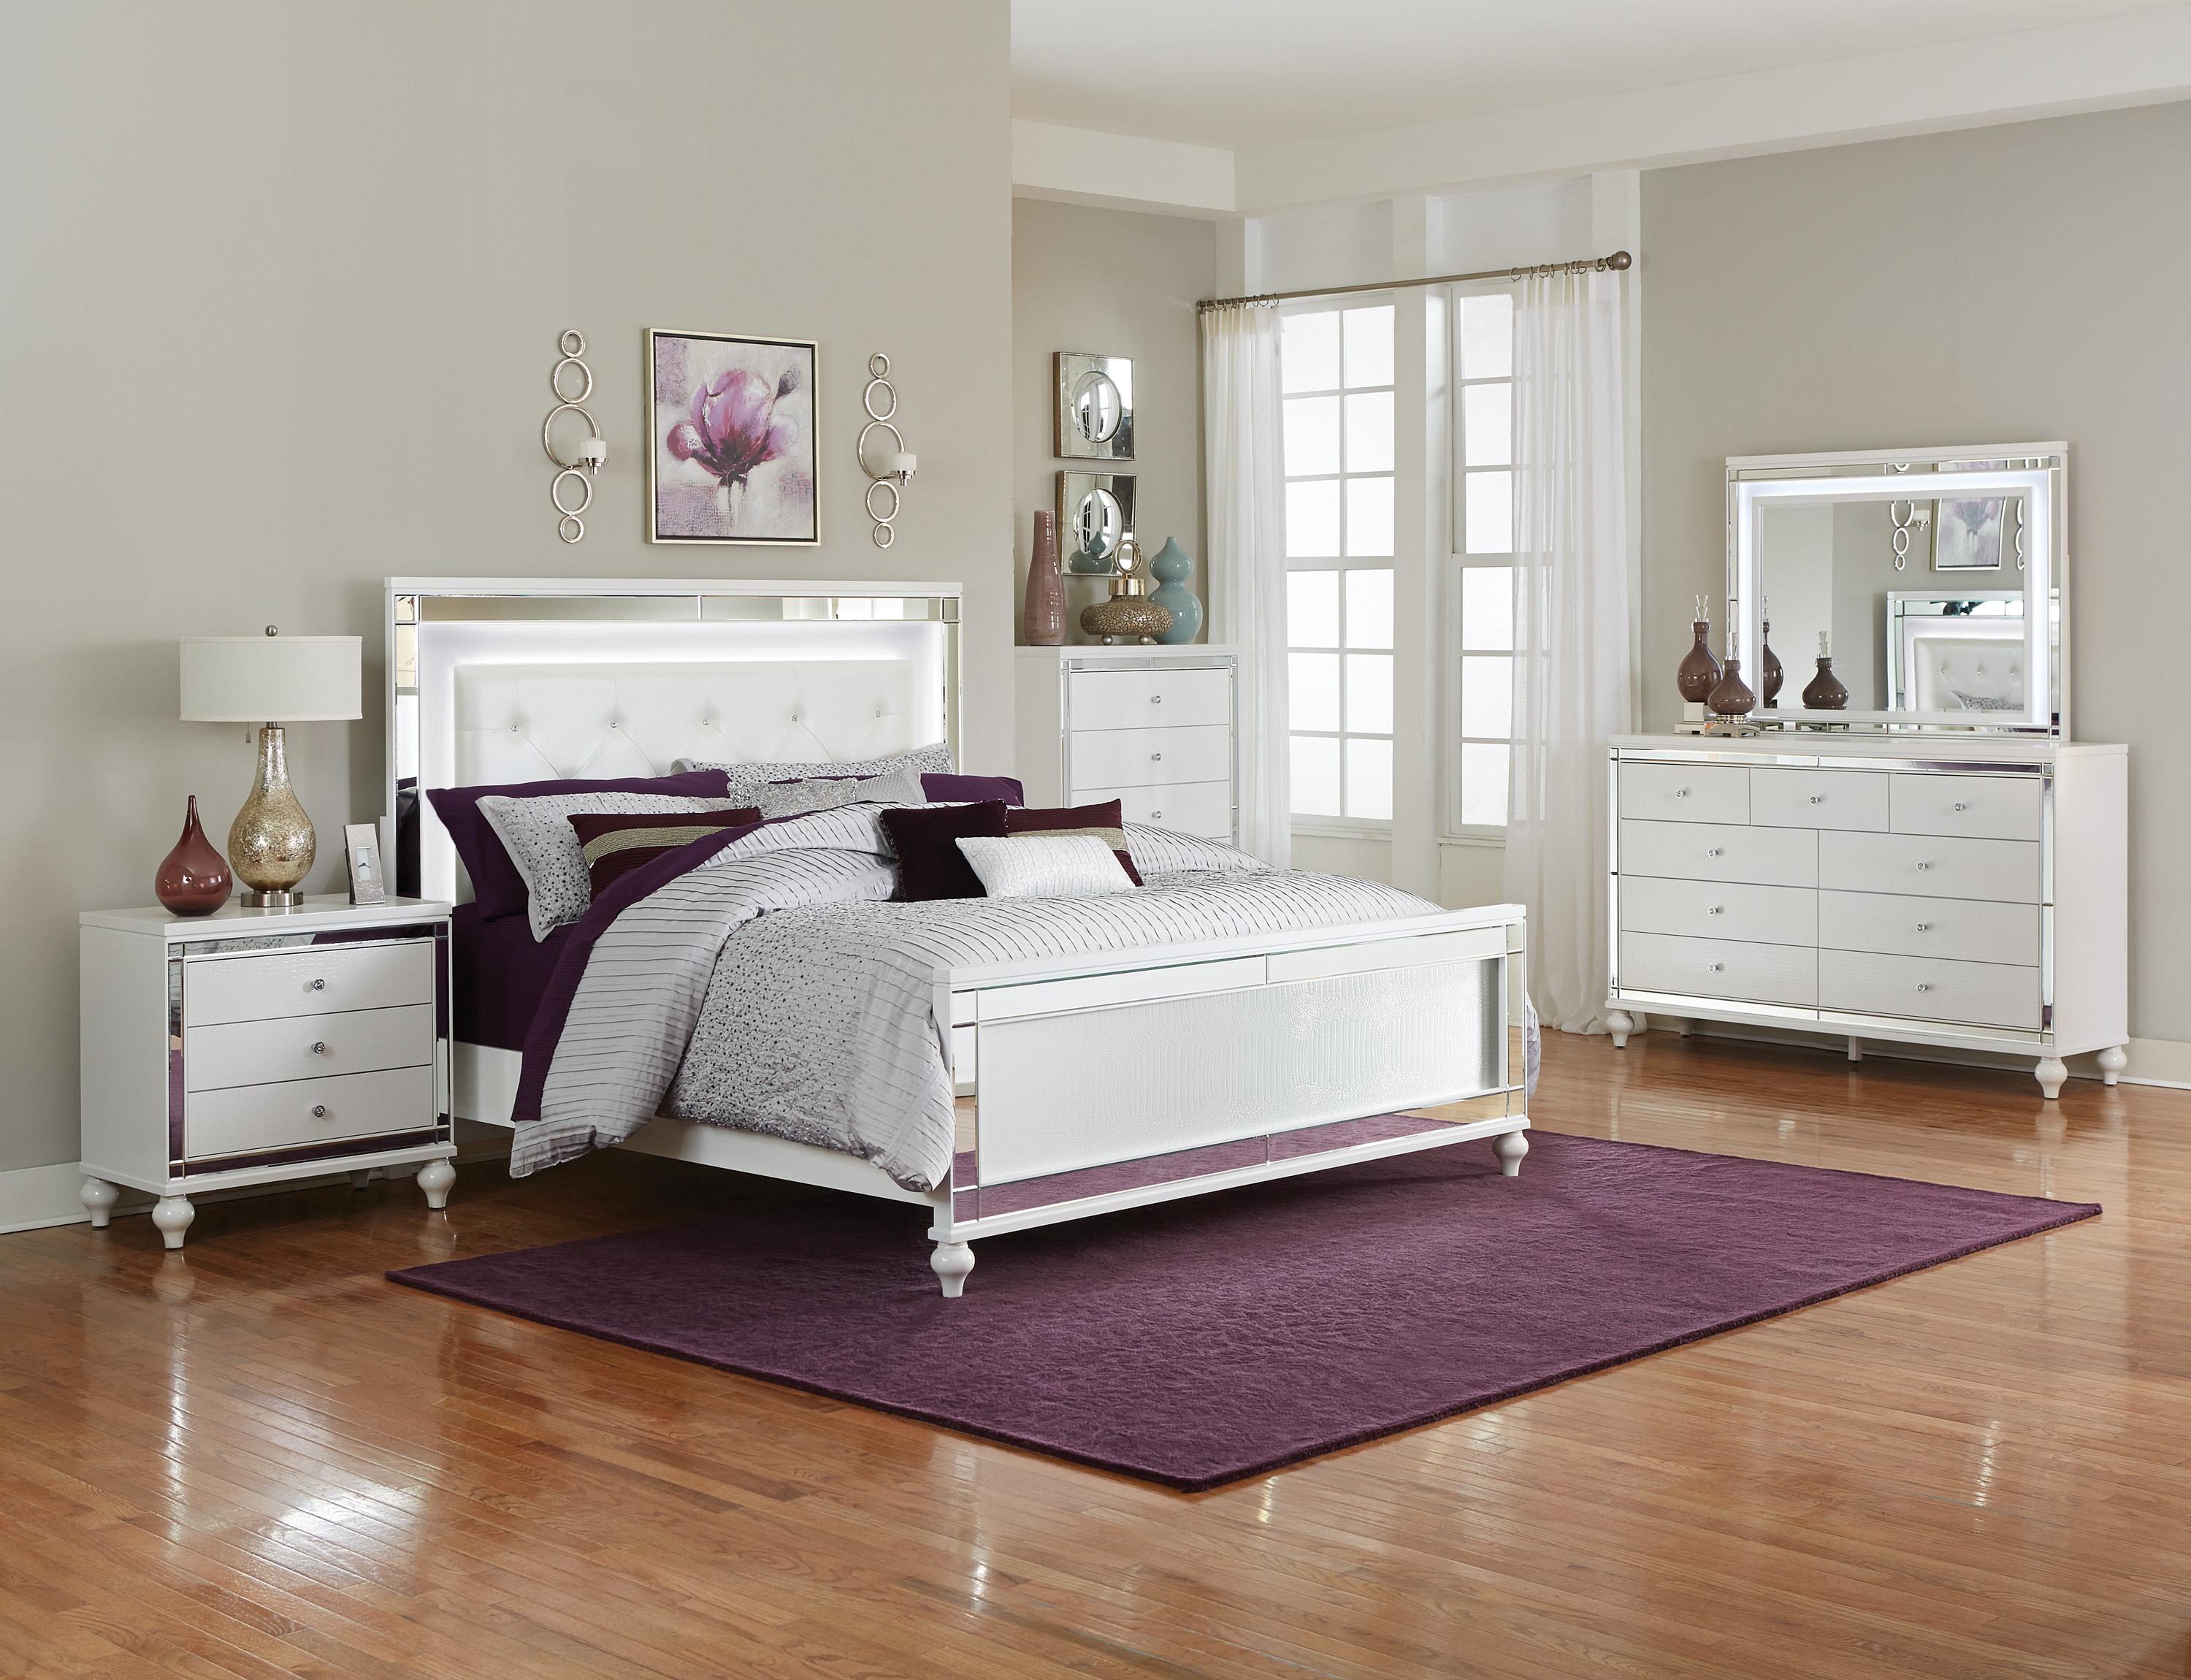 Modern Bedroom Set 1845KLED-1CK-6PC Alonza 1845KLED-1CK-6PC in White Faux Leather